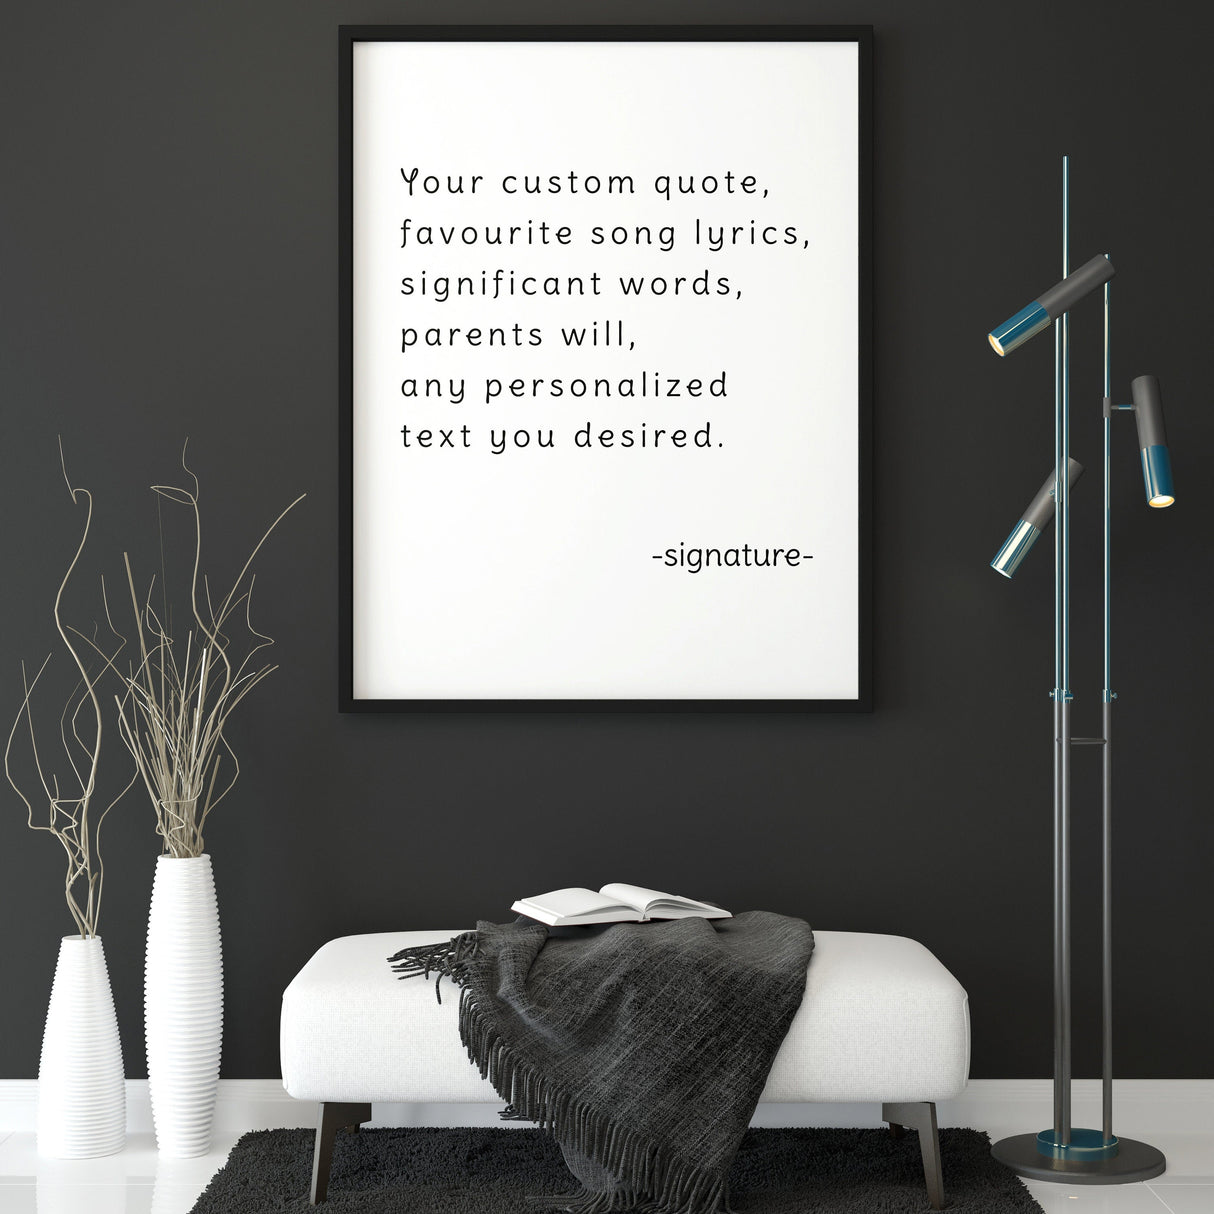 Customized Motivational Art Print - Personalized Inspiration Wall Decor Poster by Decords | Decords